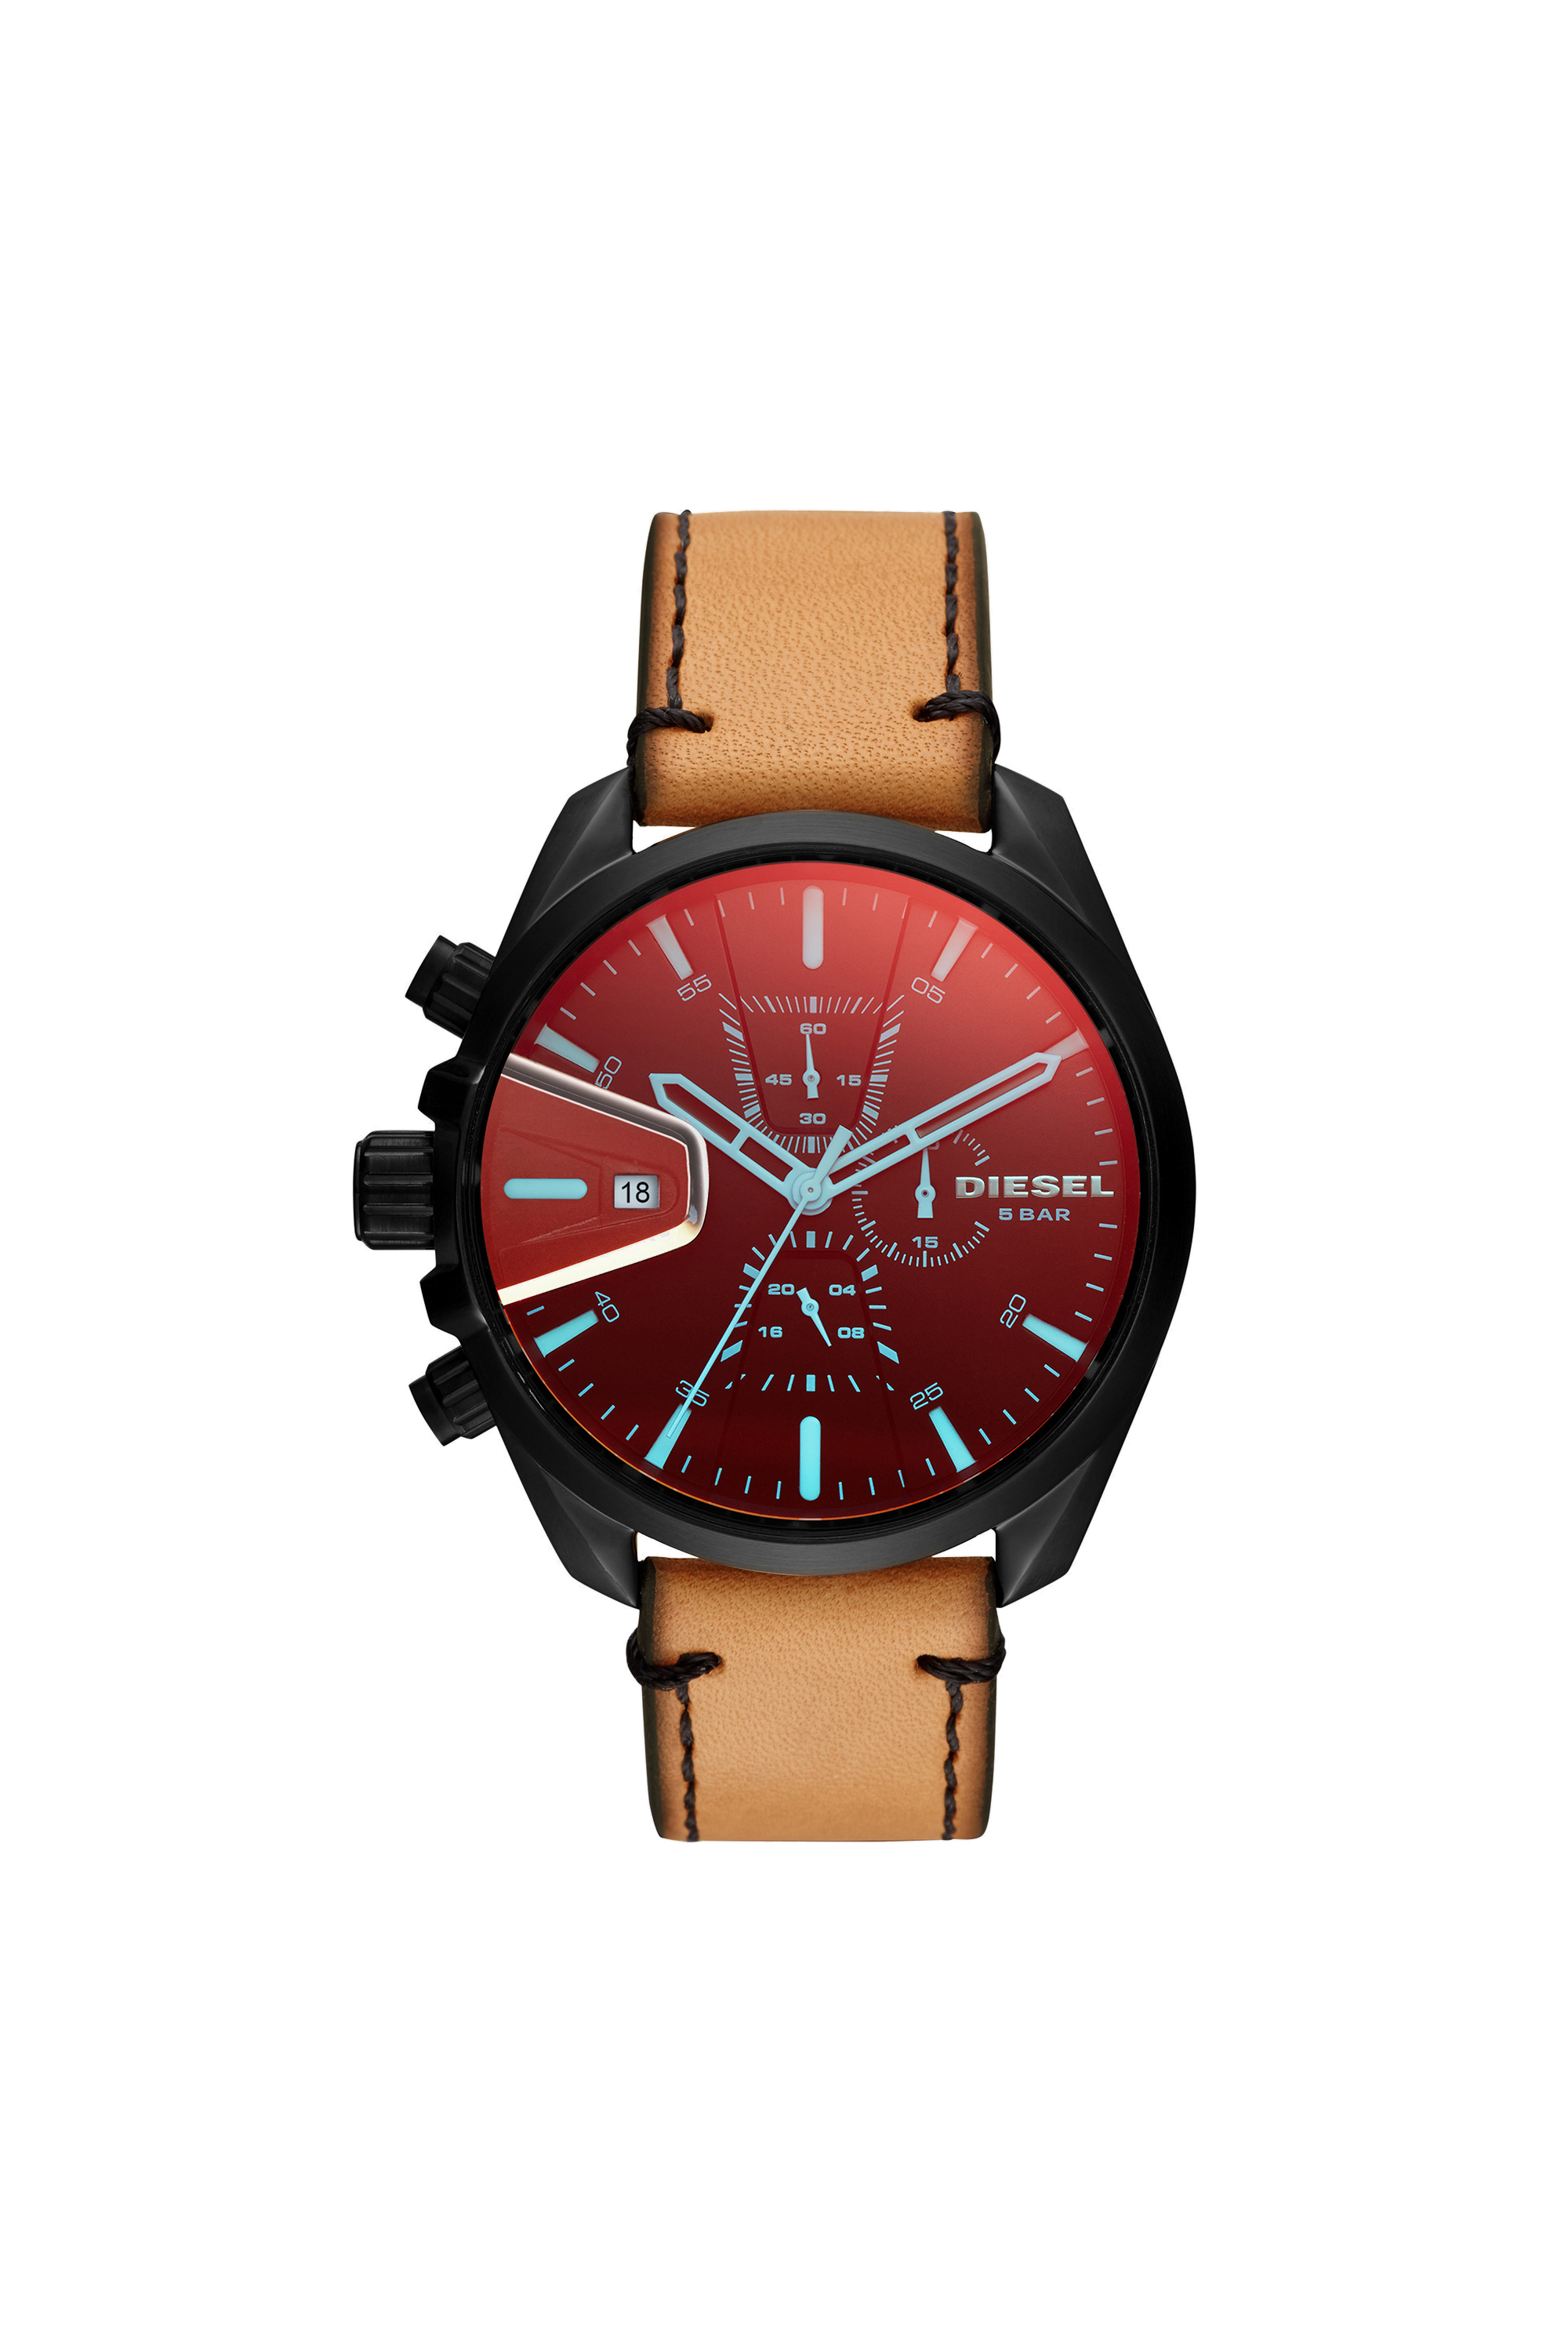 DZ4471 Man: MS9 Chrono leather watch with iridescent lens | Diesel